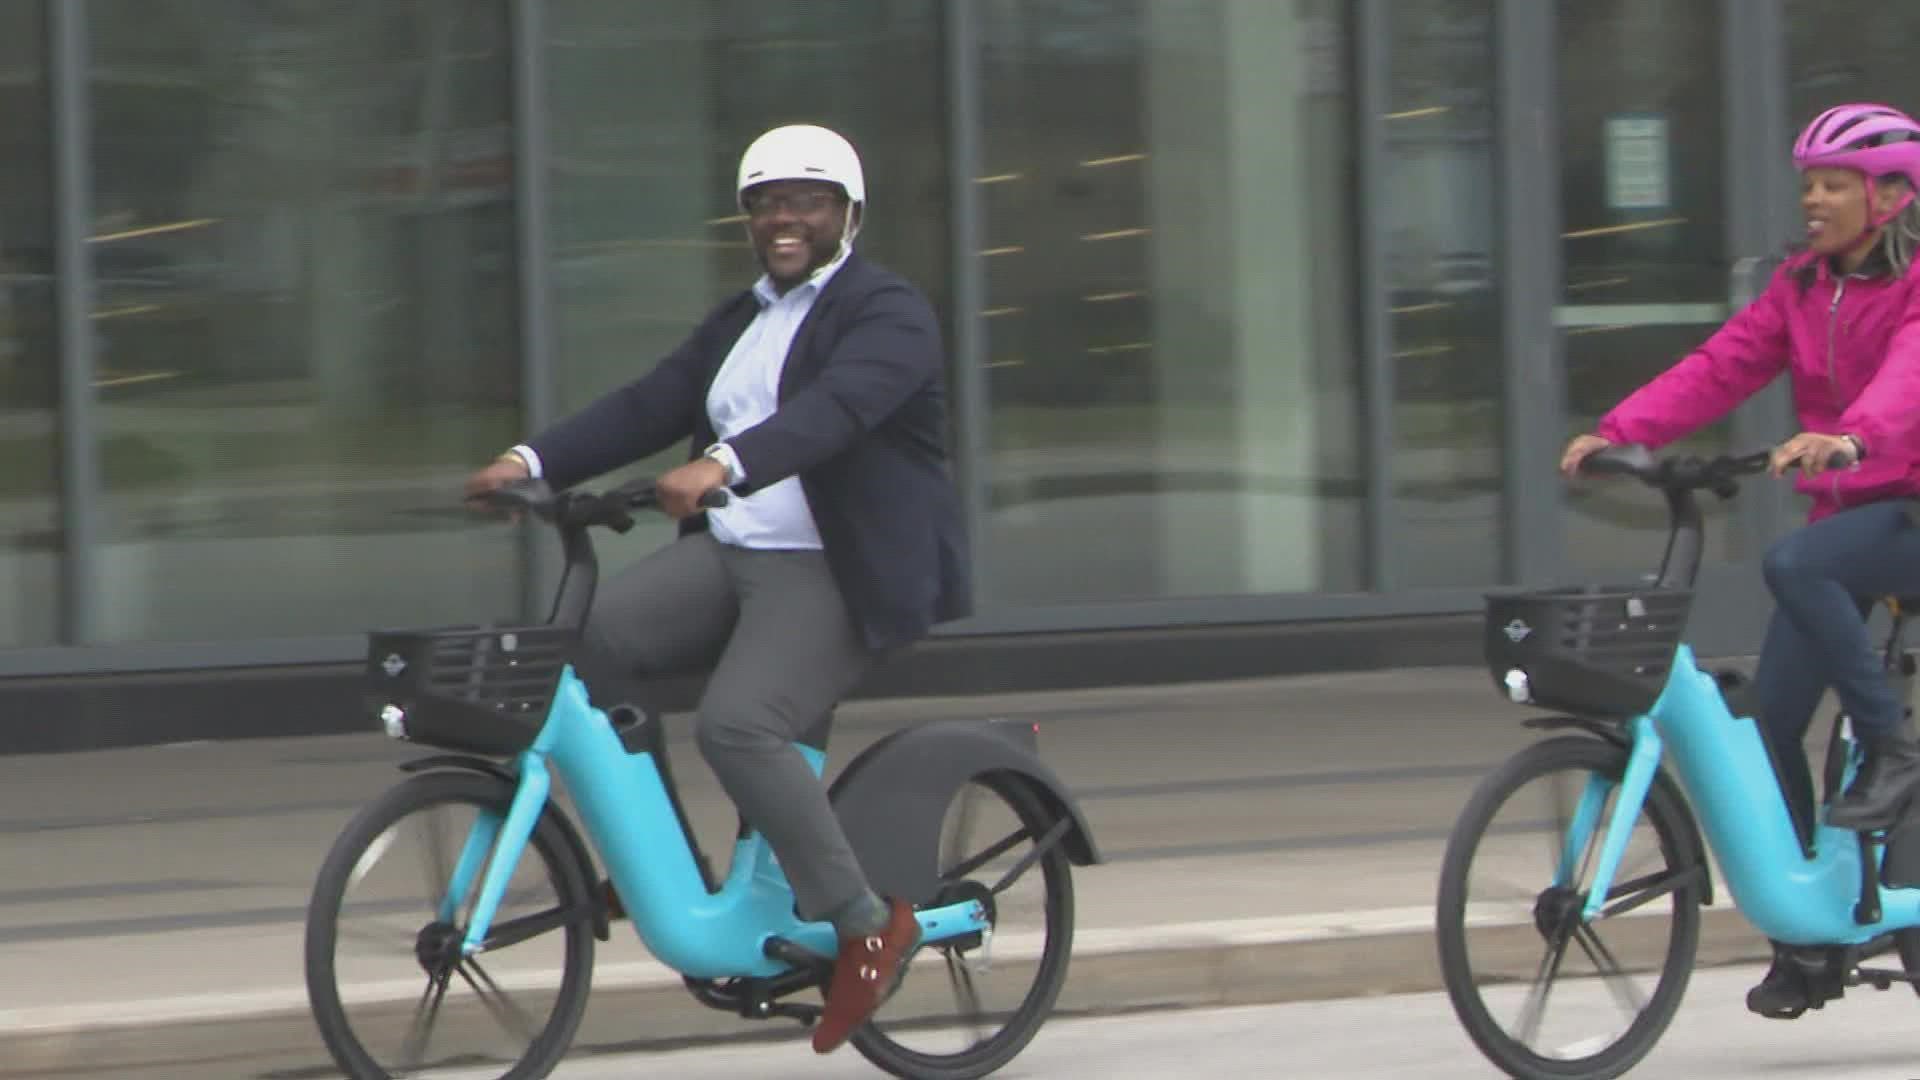 E-bikes from both LINK and Bird will soon be deployed for public use, according to a press release from the city.